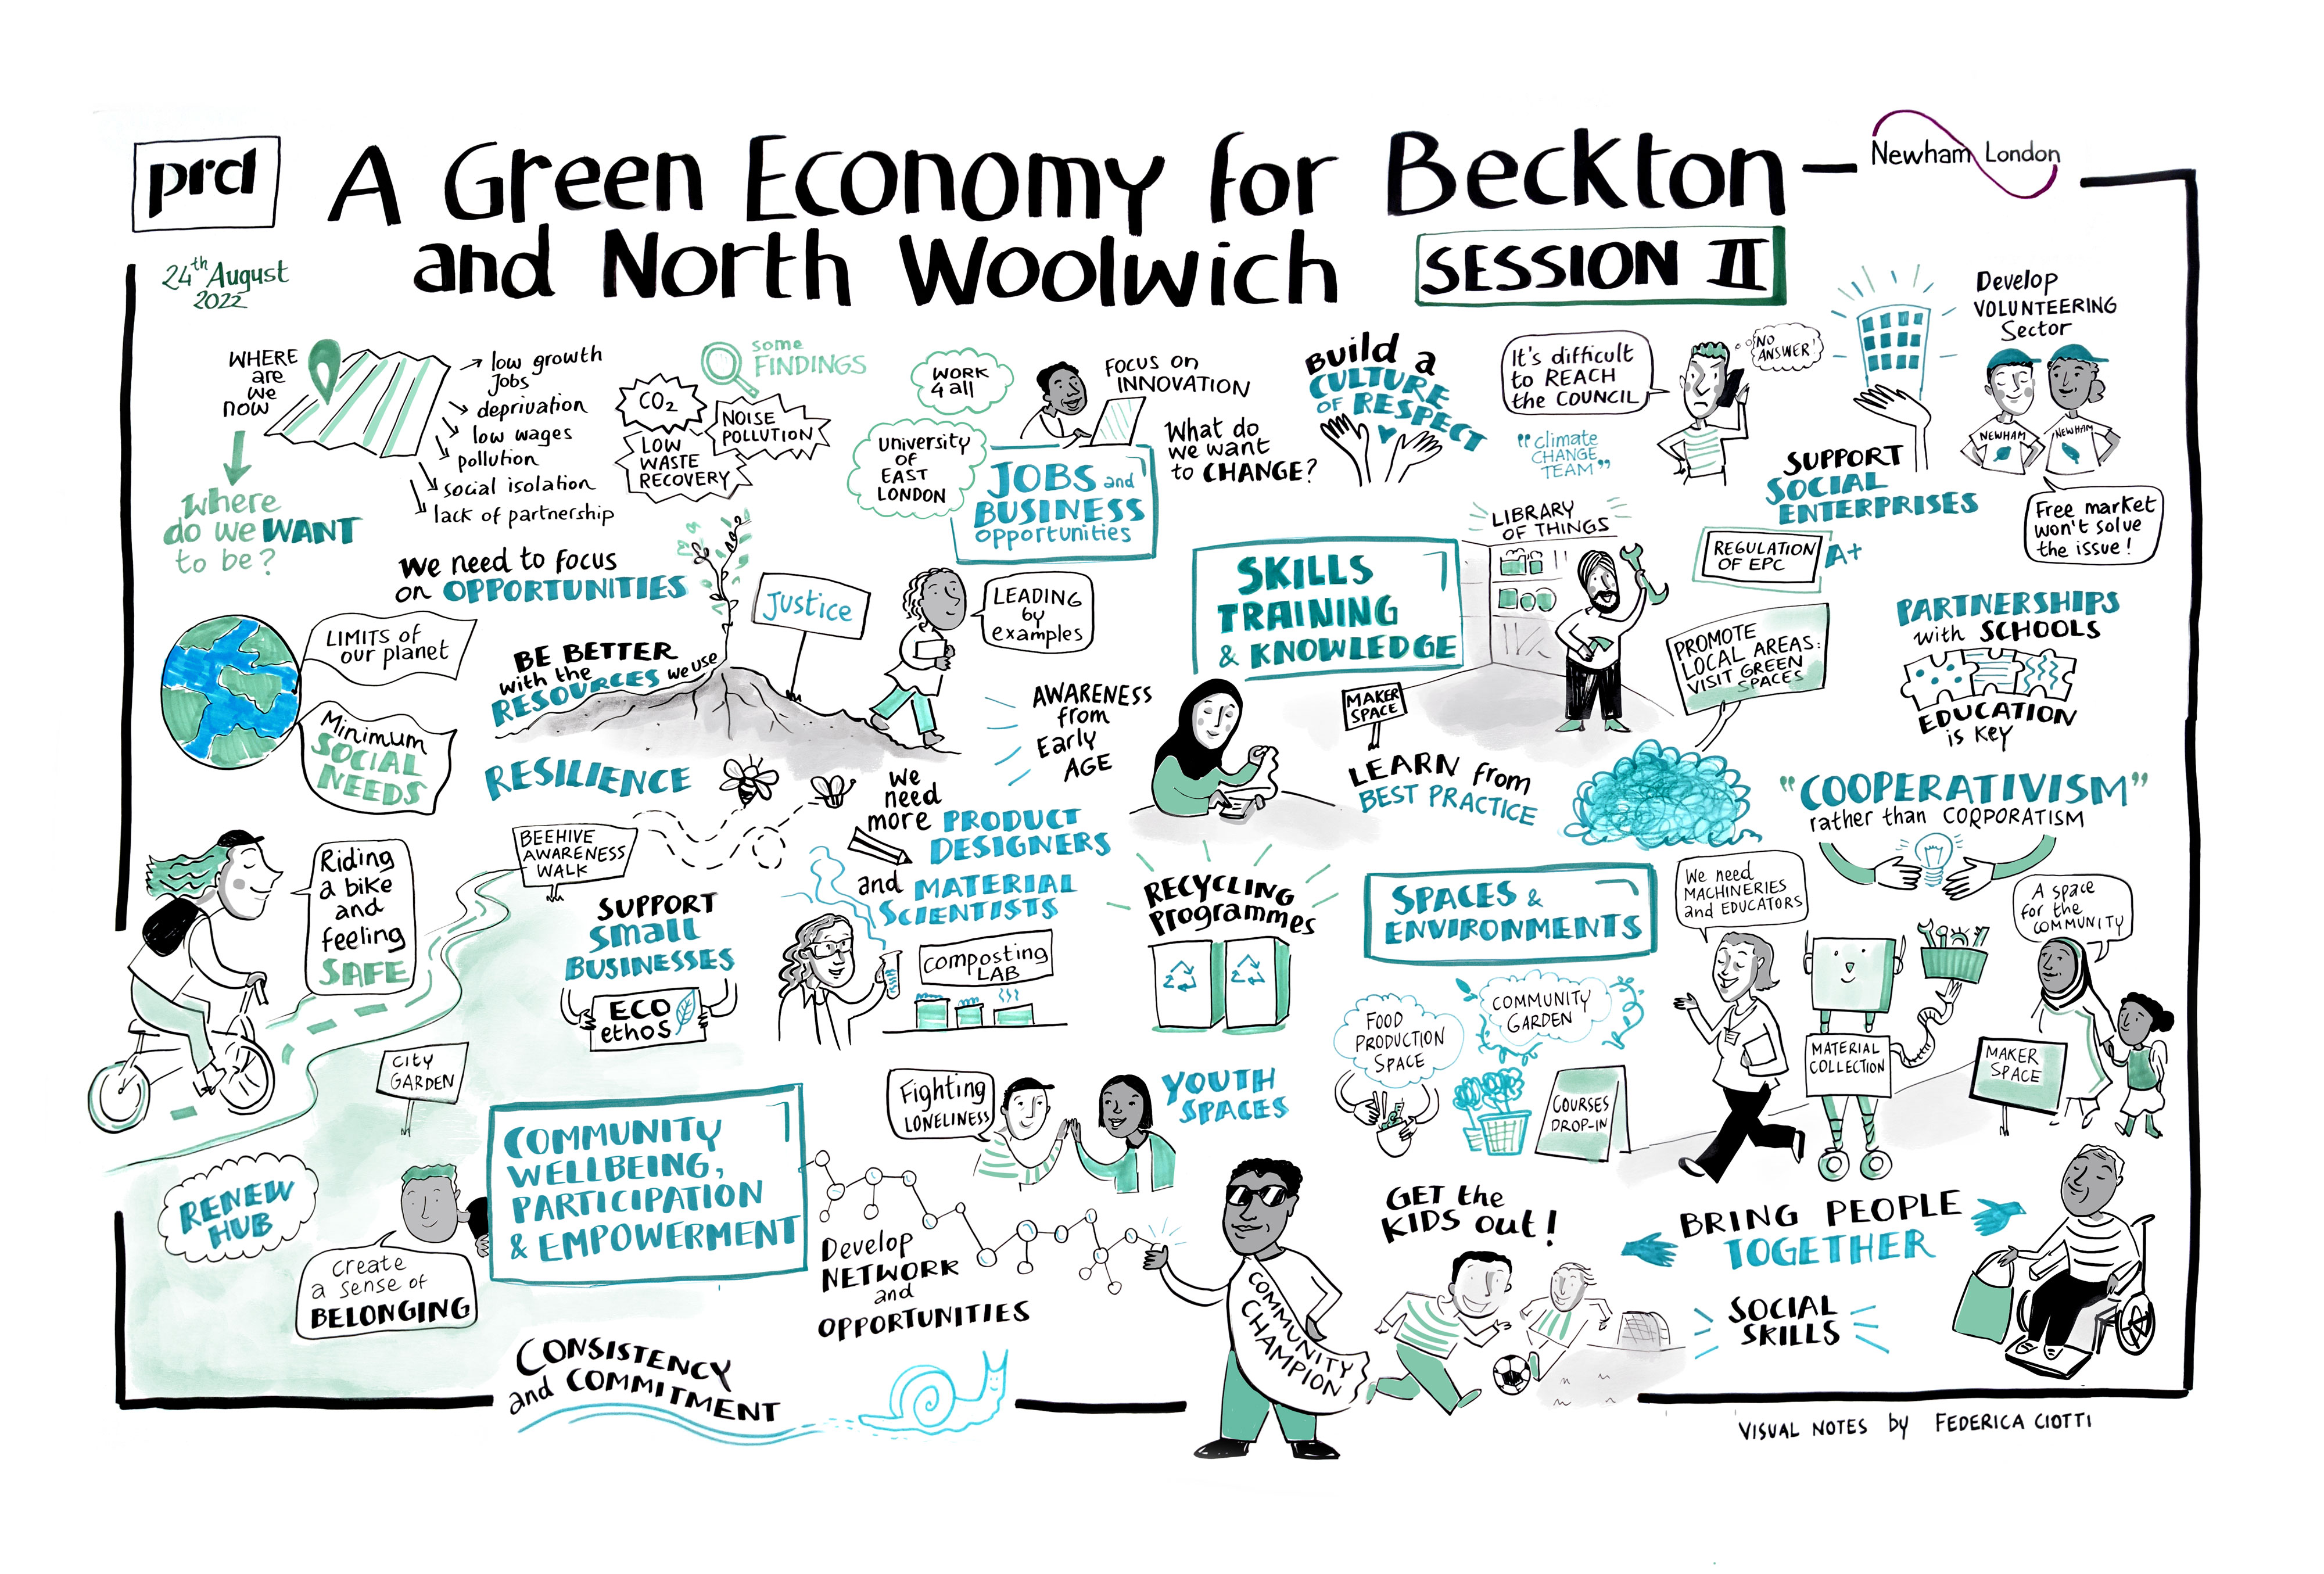 A green economy for Beckton and North Woolwich